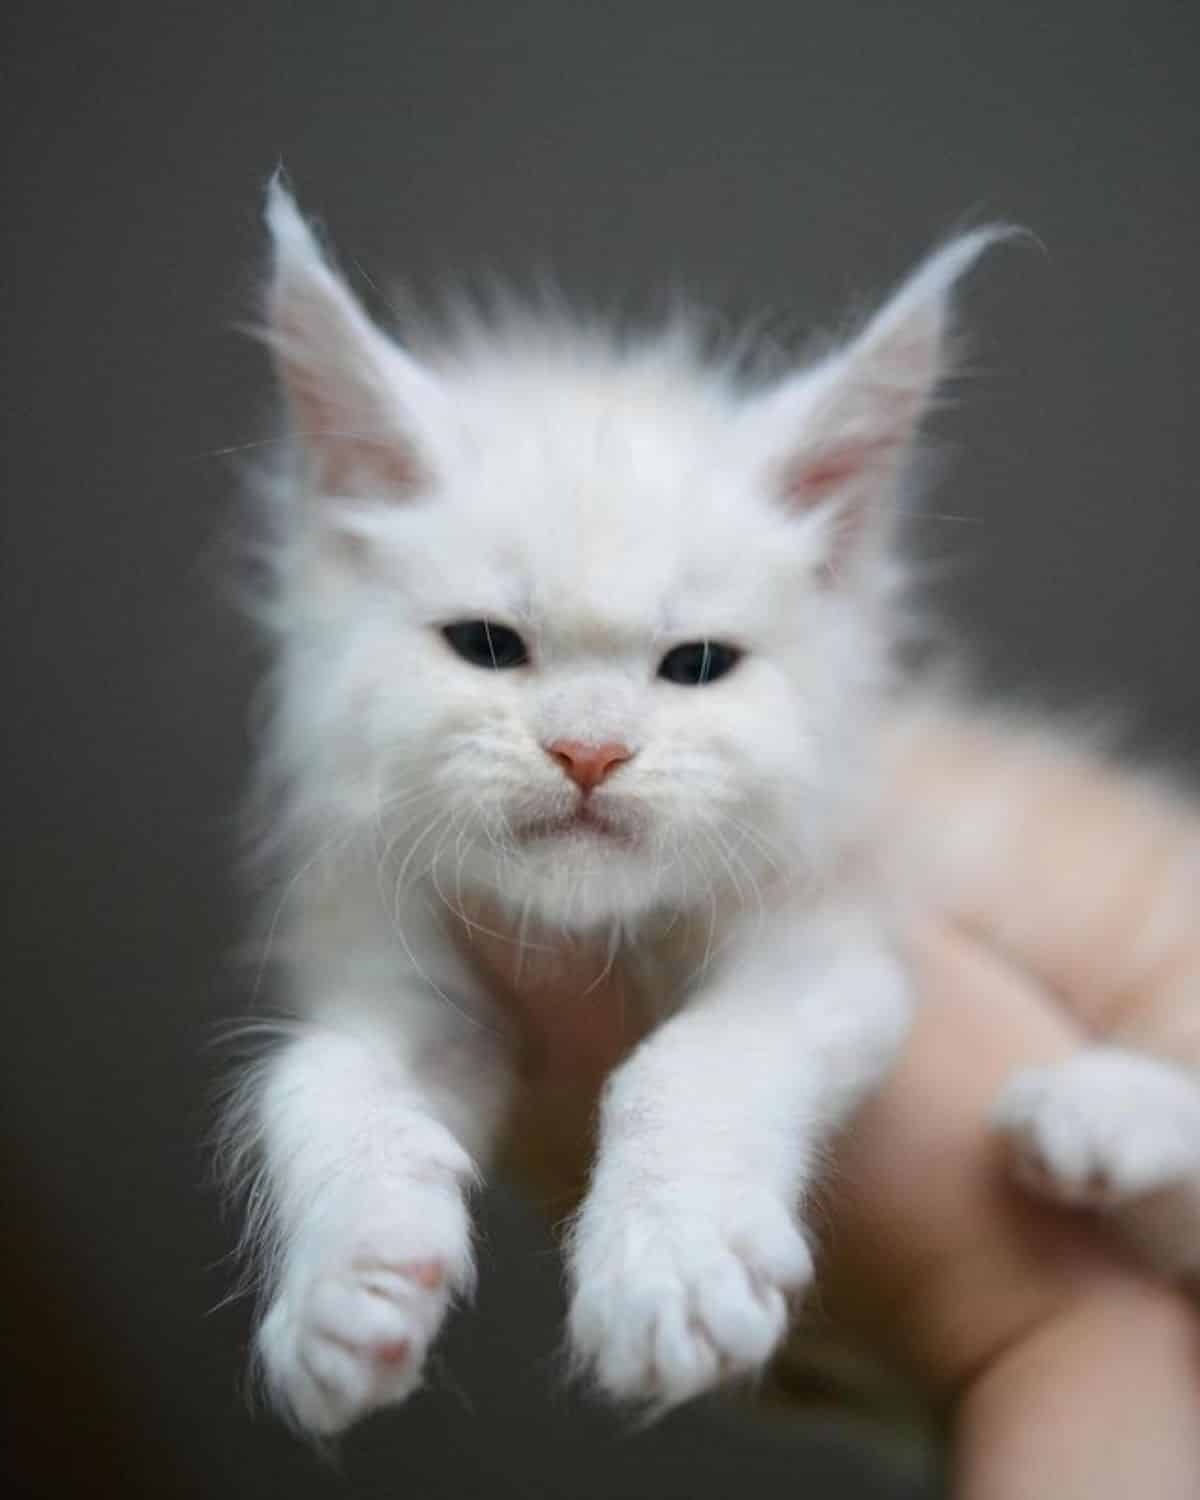 A hand holding a fuzzy white maine coon kitten.